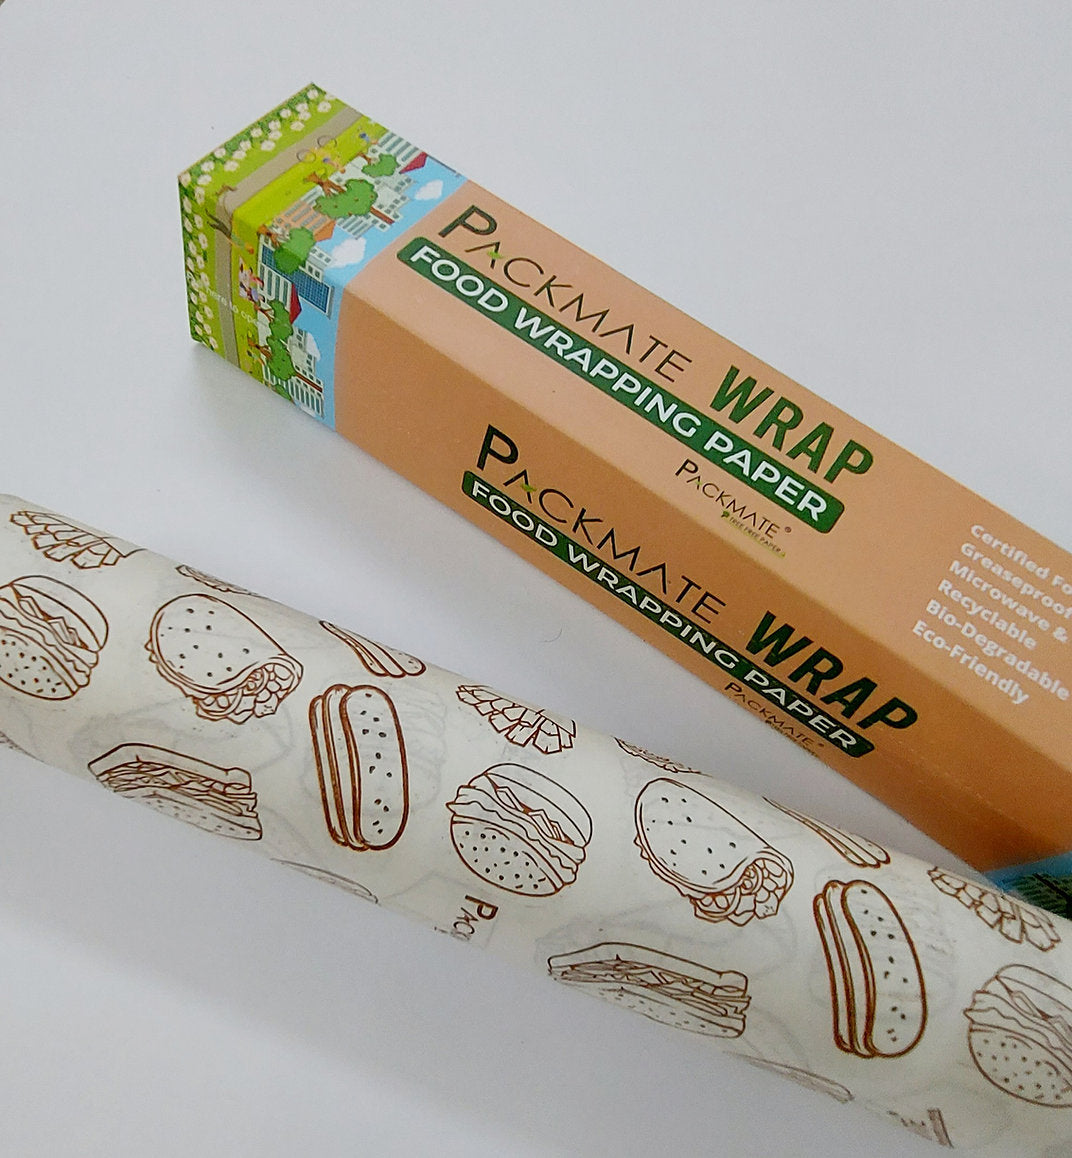 Packmate Wrap - Greaseproof Food Wraping Paper, 20 Meter Roll (Pack of 2)